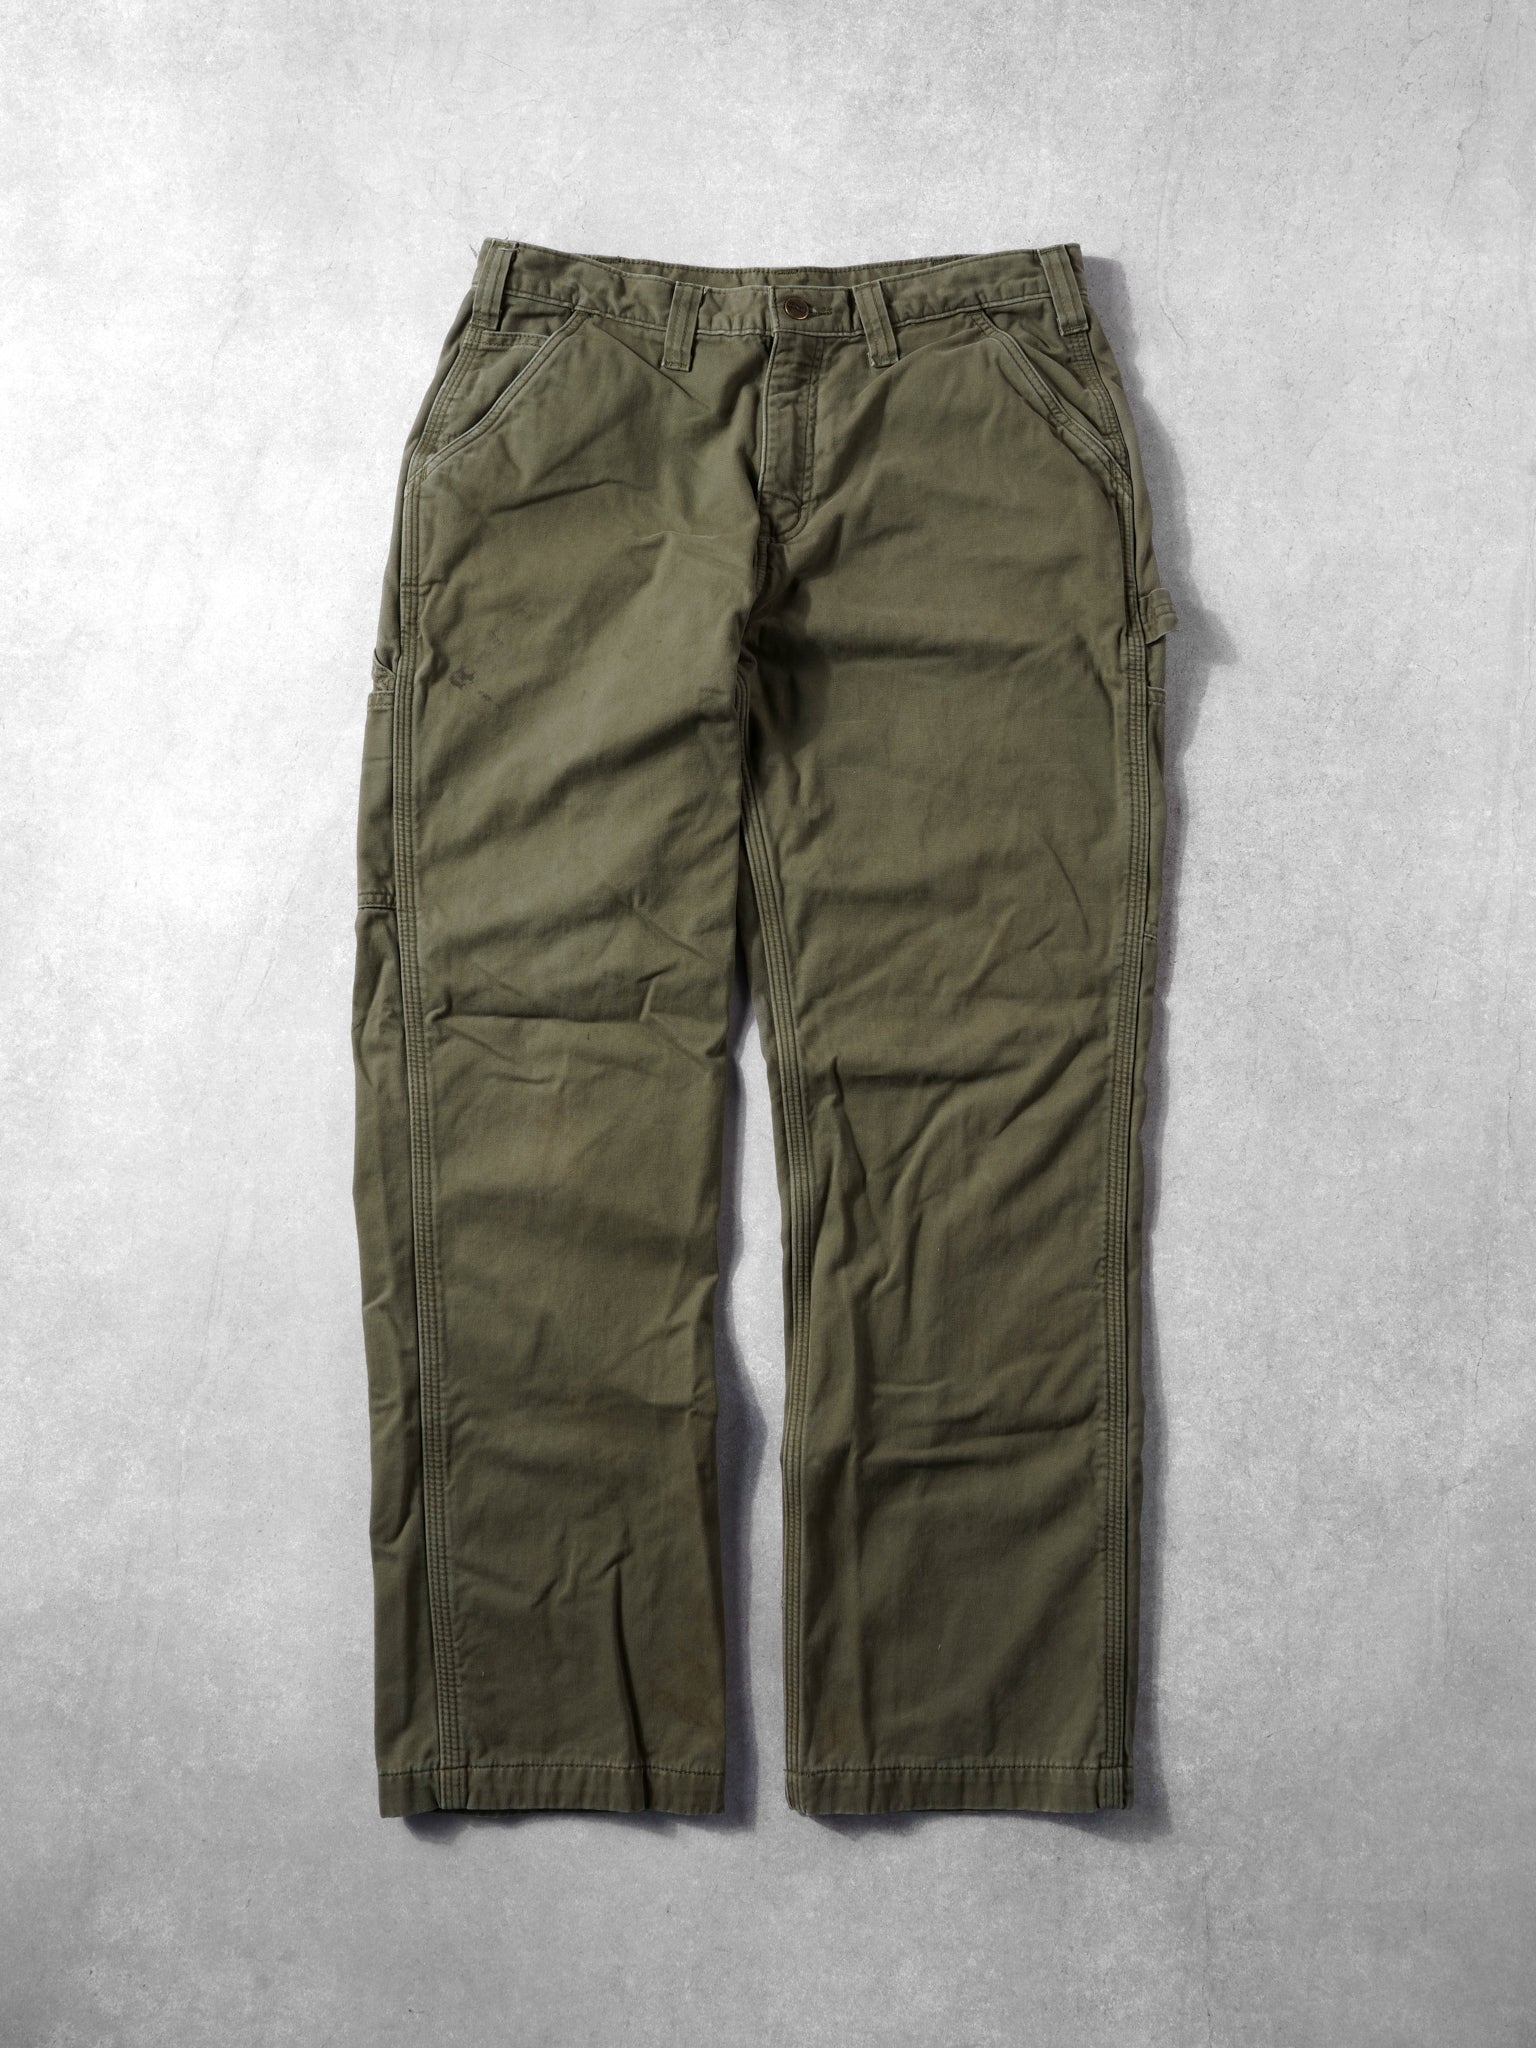 Vintage 90s Juniper Washed Green Carhartt Relax Fit Carpenter Lined Pants (34x30)